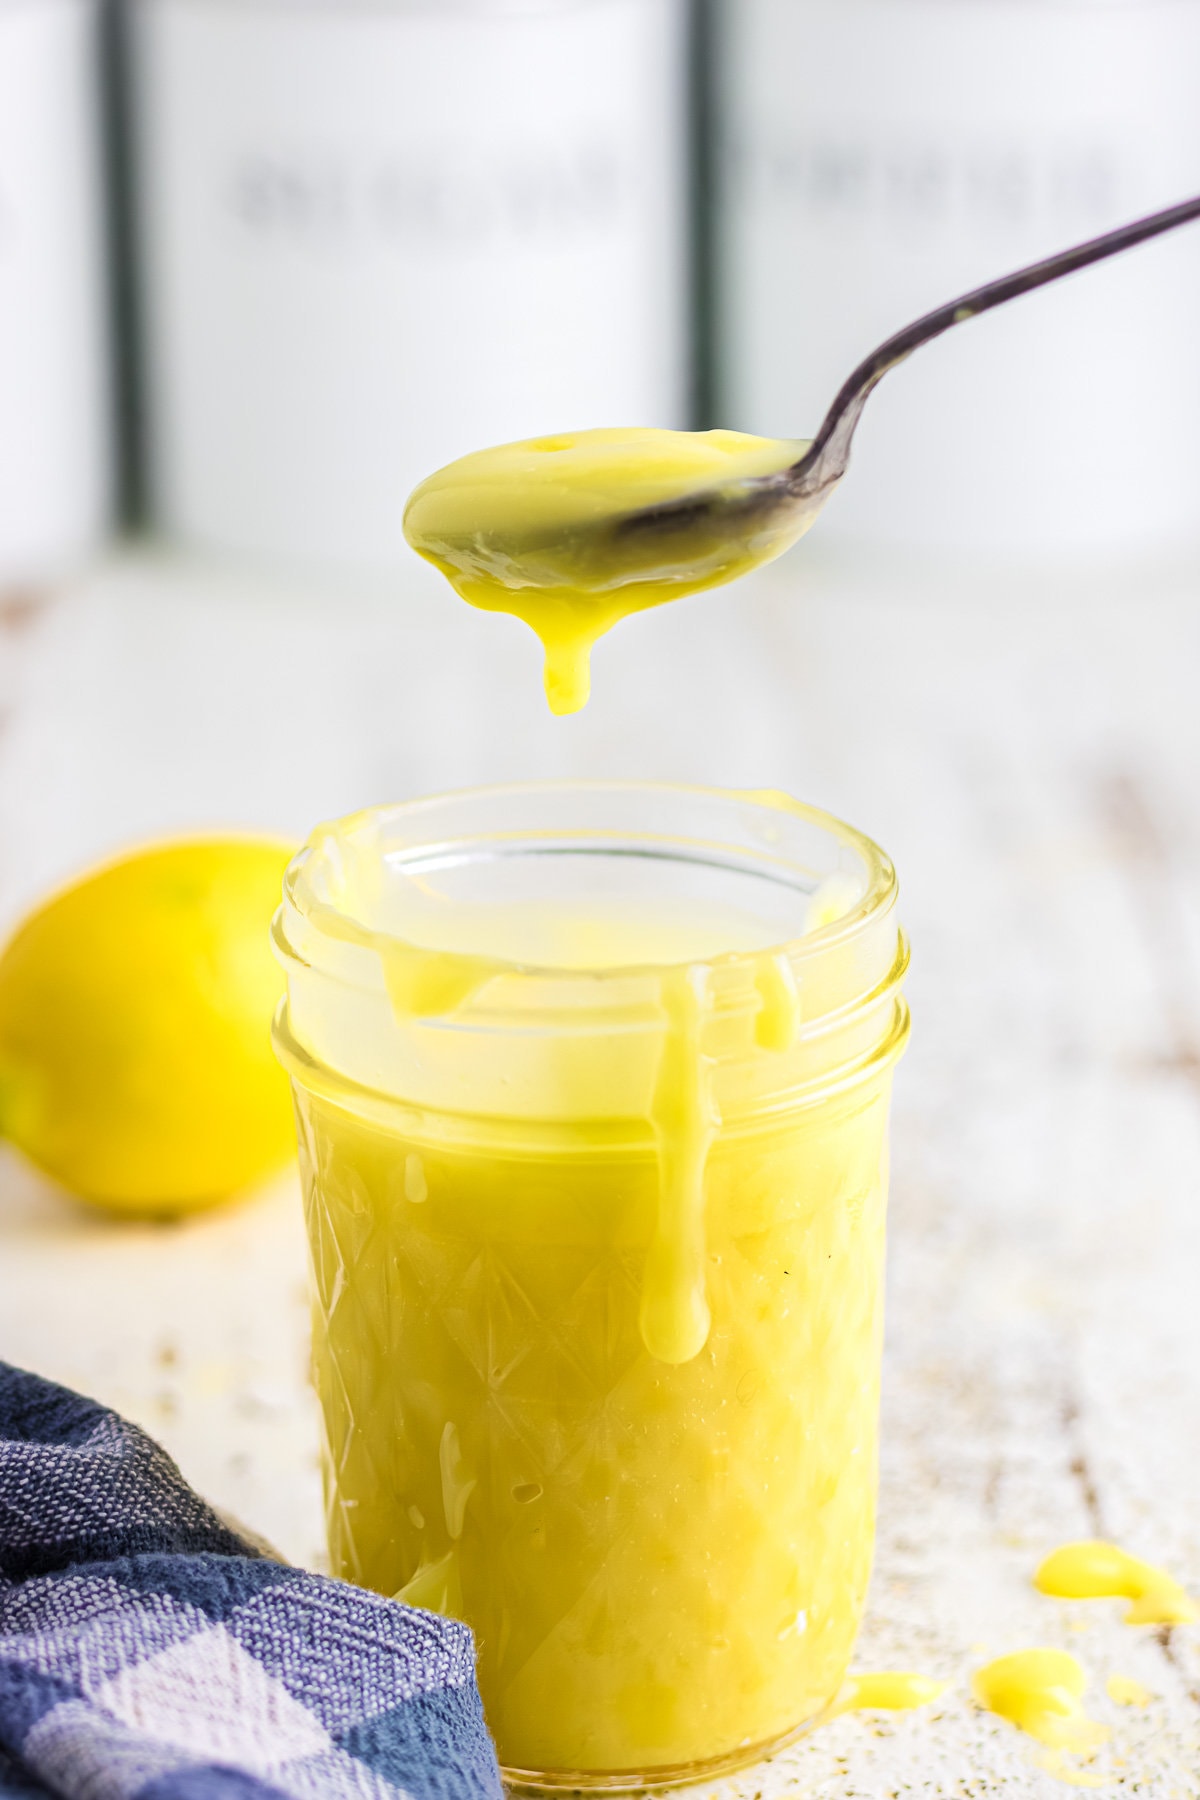 An up-close view of a mason jar filled with bright yellow lemon curd and a spoon scooping some out.